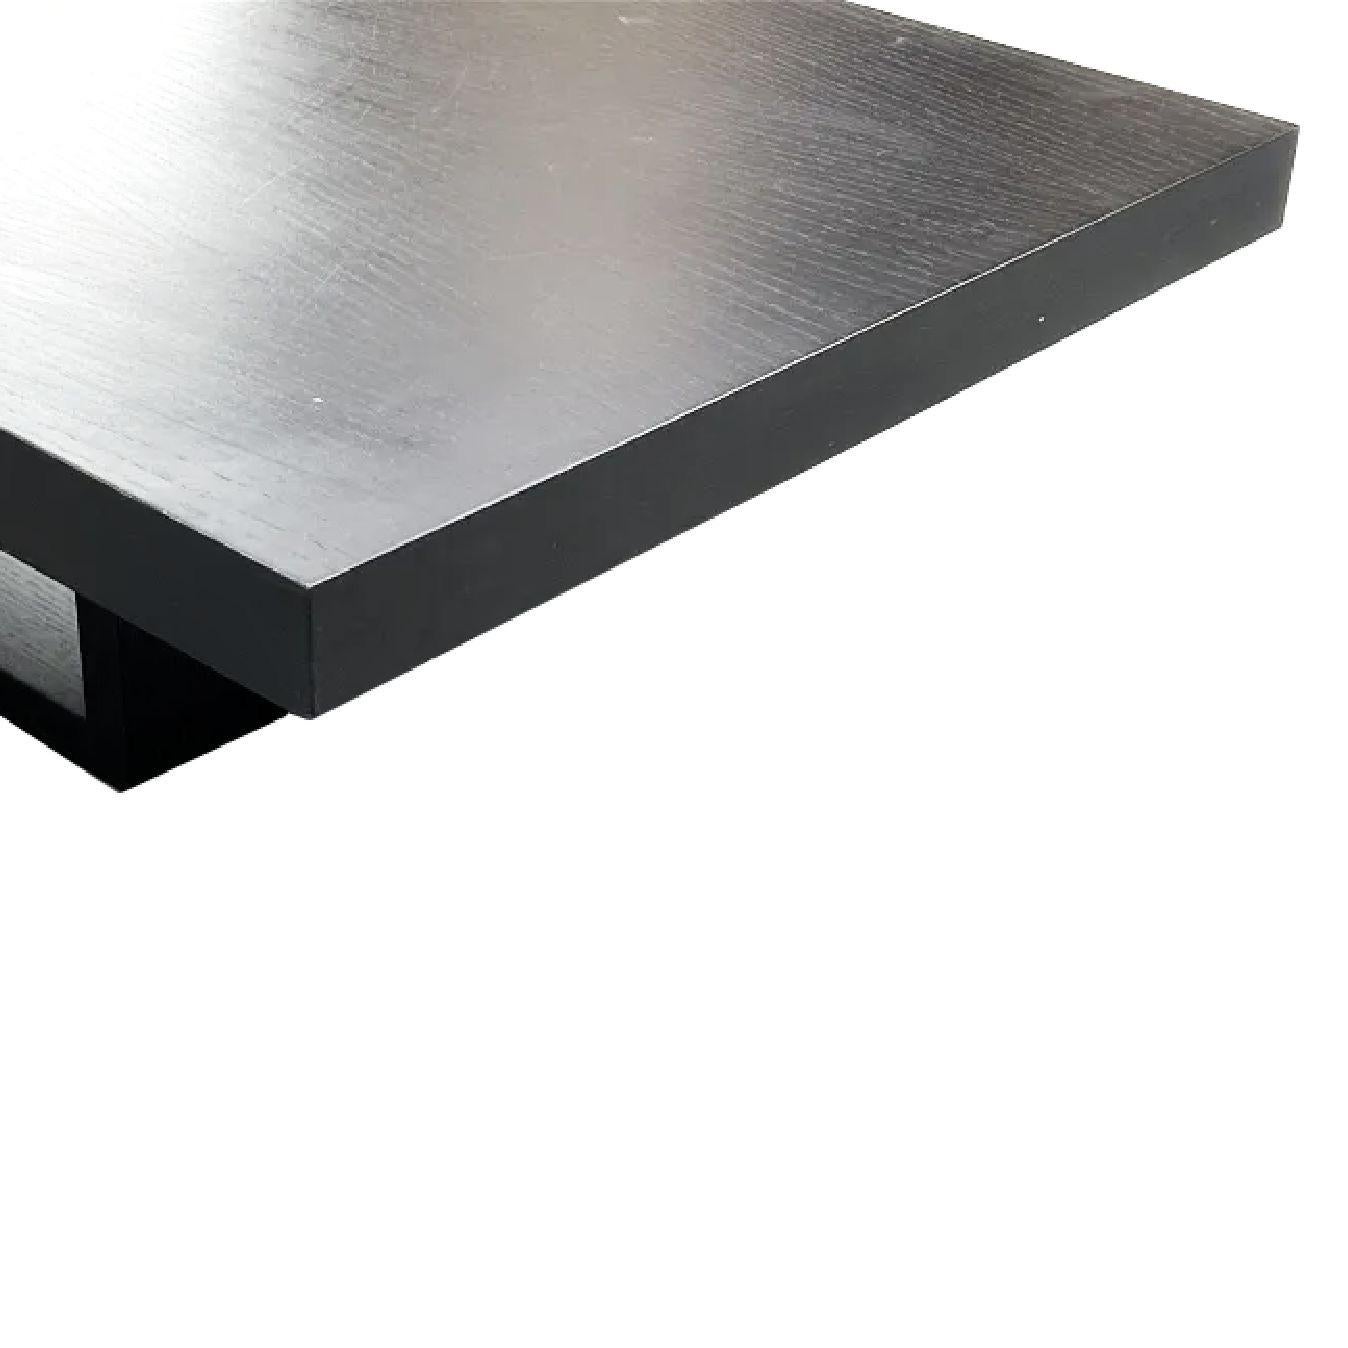 Cassina Blox Ebonized Oak Rectangular Coffee Table, Jehs + Laub, Italy, c. 2000. In Fair Condition For Sale In Brooklyn, NY